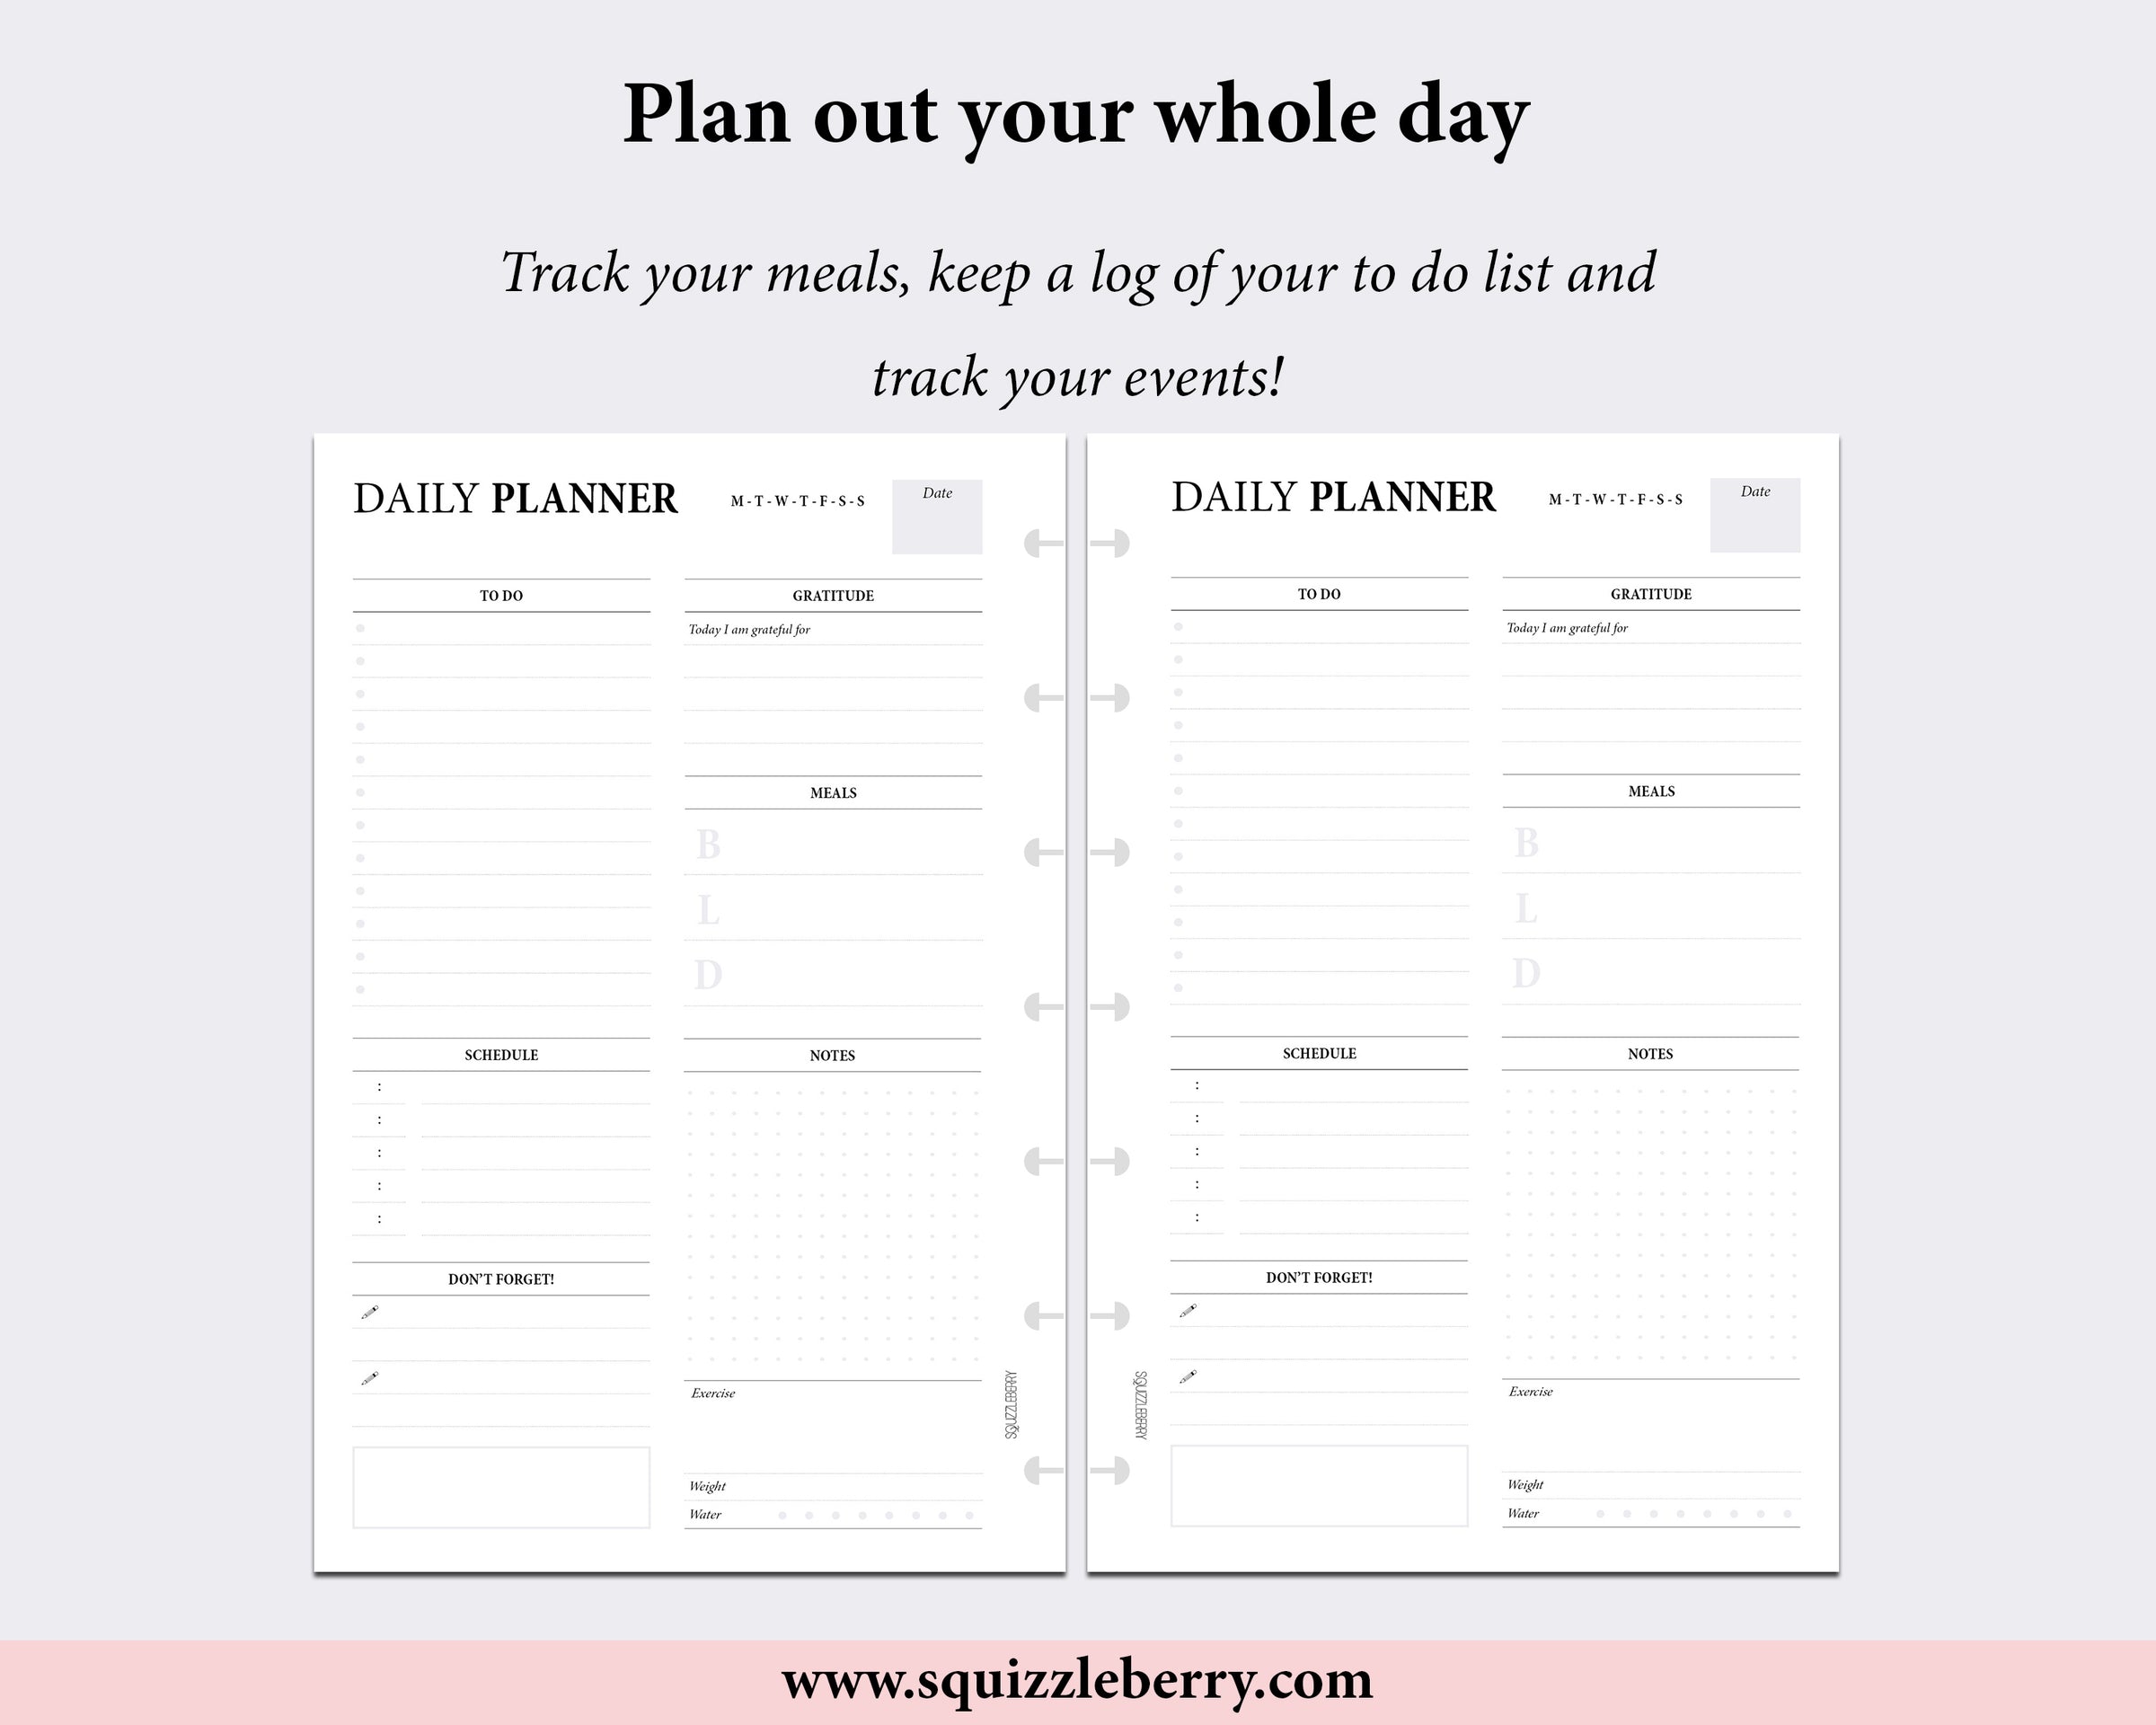 Daily Planner - Mini HP | SquizzleBerry